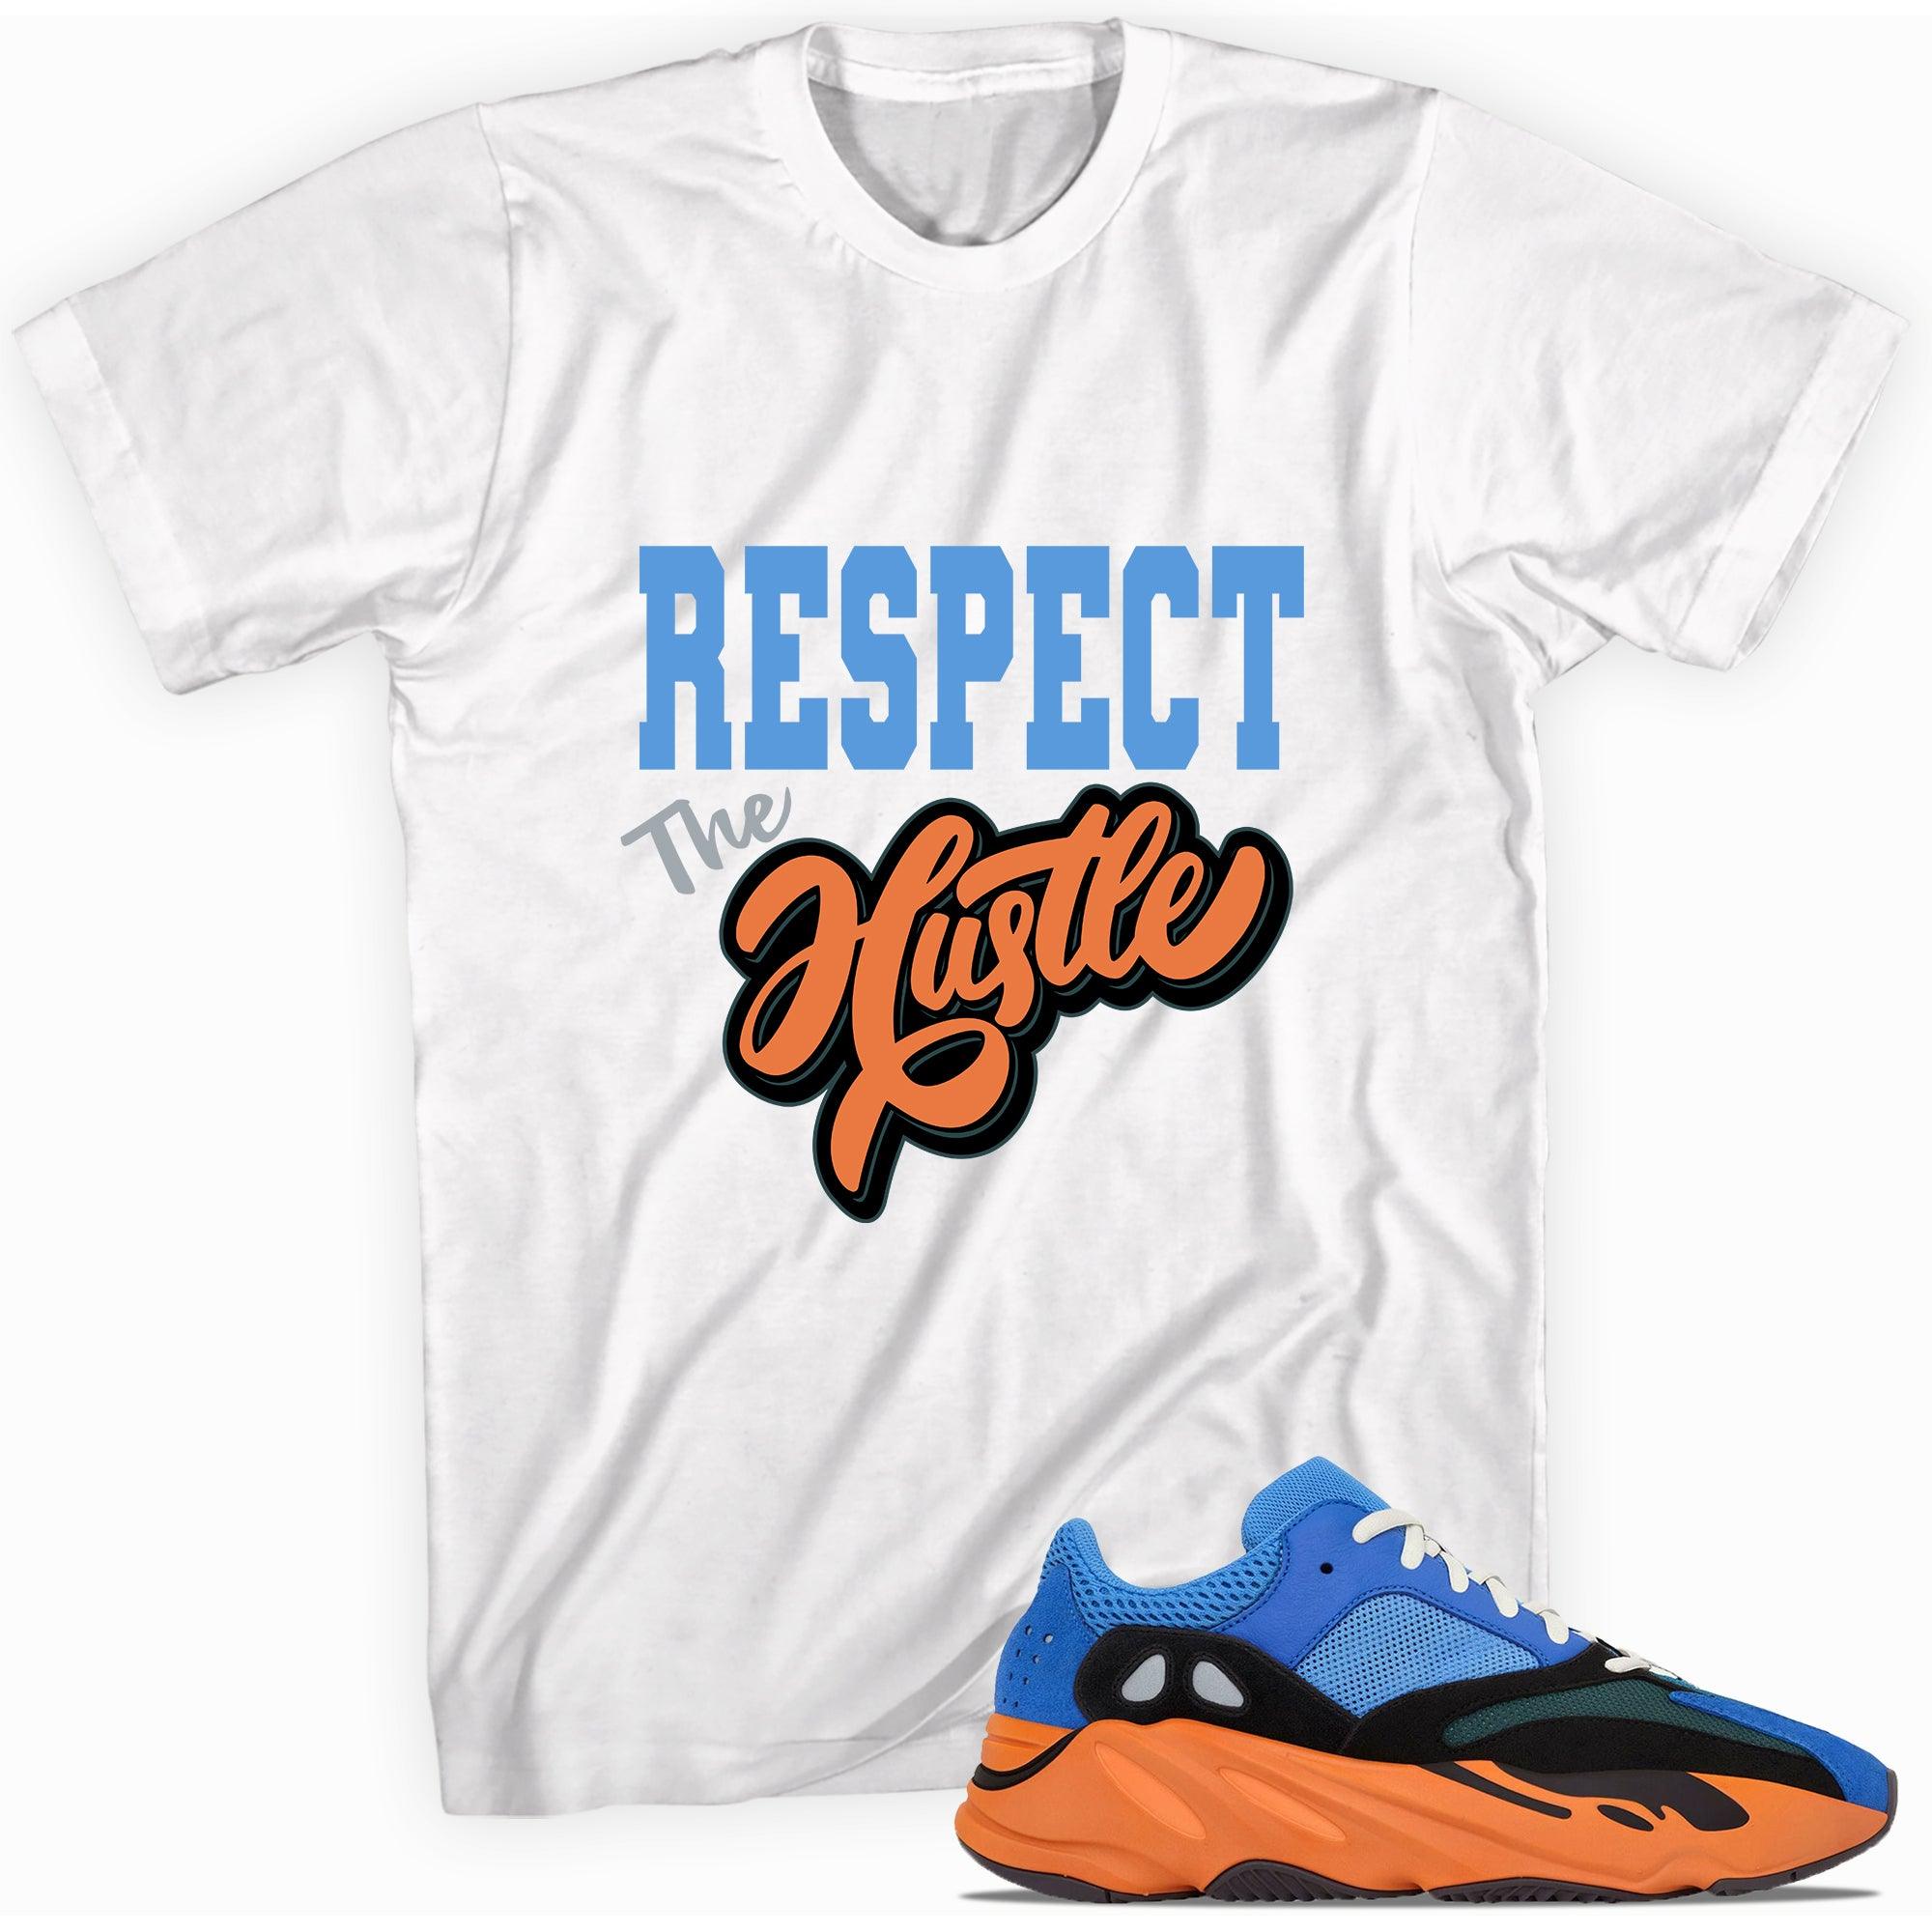 Respect The Hustle Shirt Yeezy Boost 700s Bright Blue photo